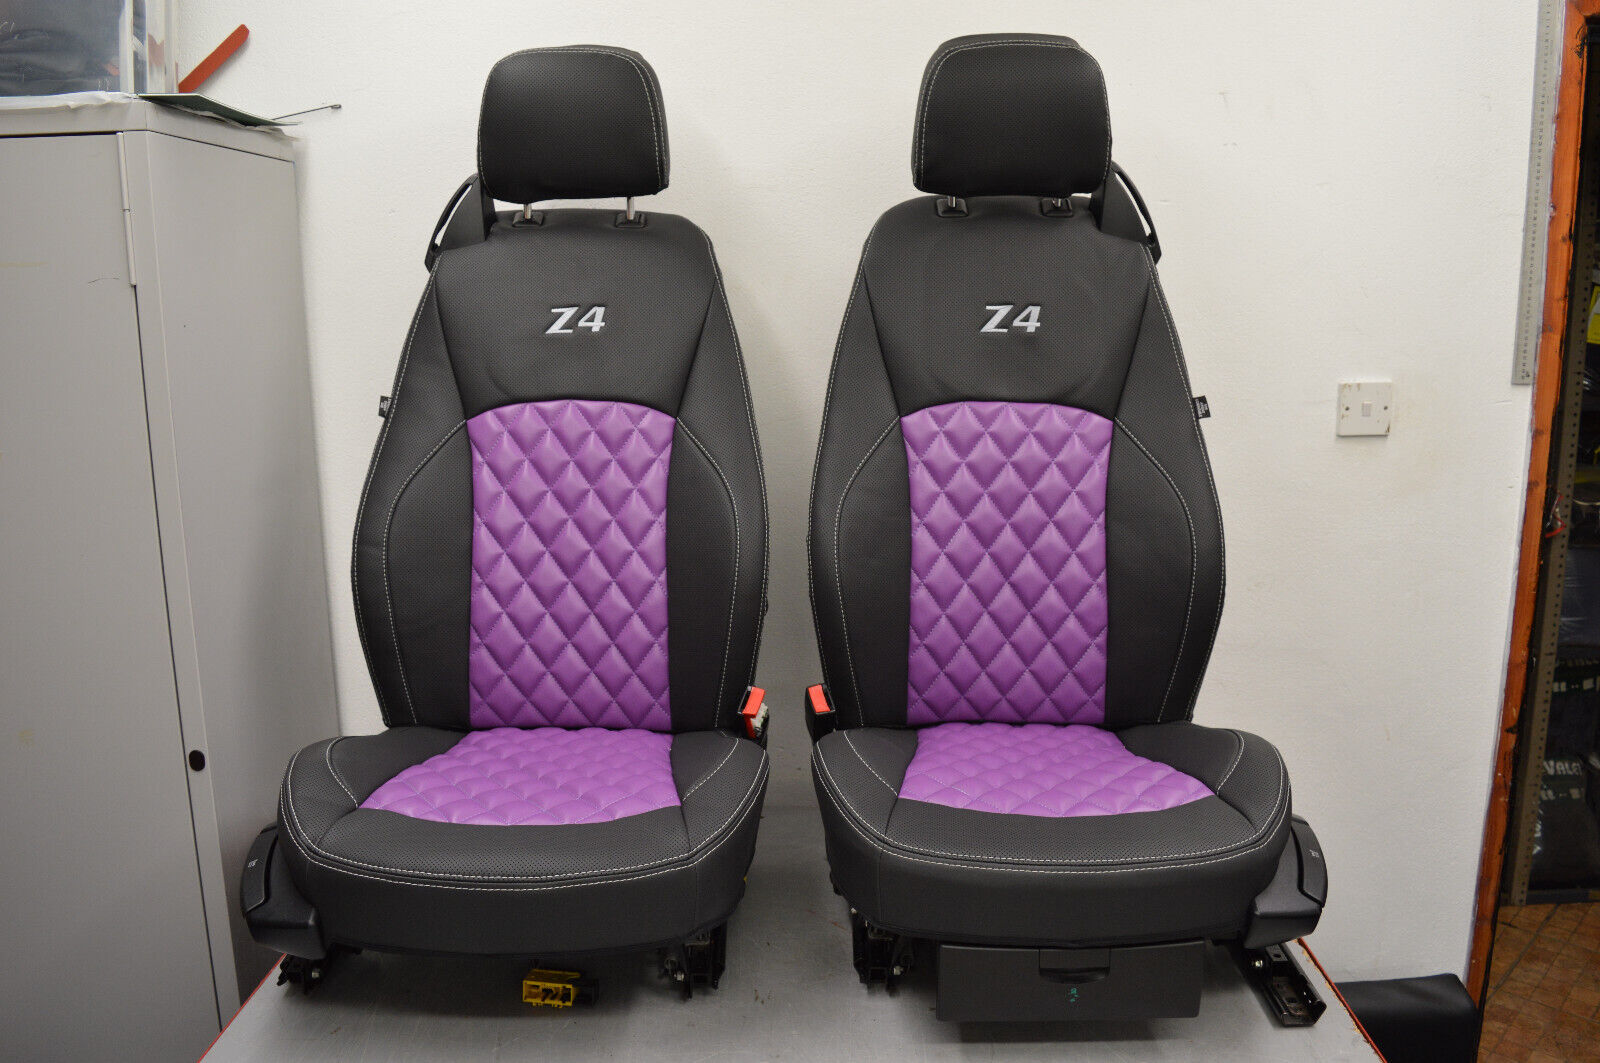 PRIVATE LISTING: BMW E85 Z4 TAILORED SEAT COVERS